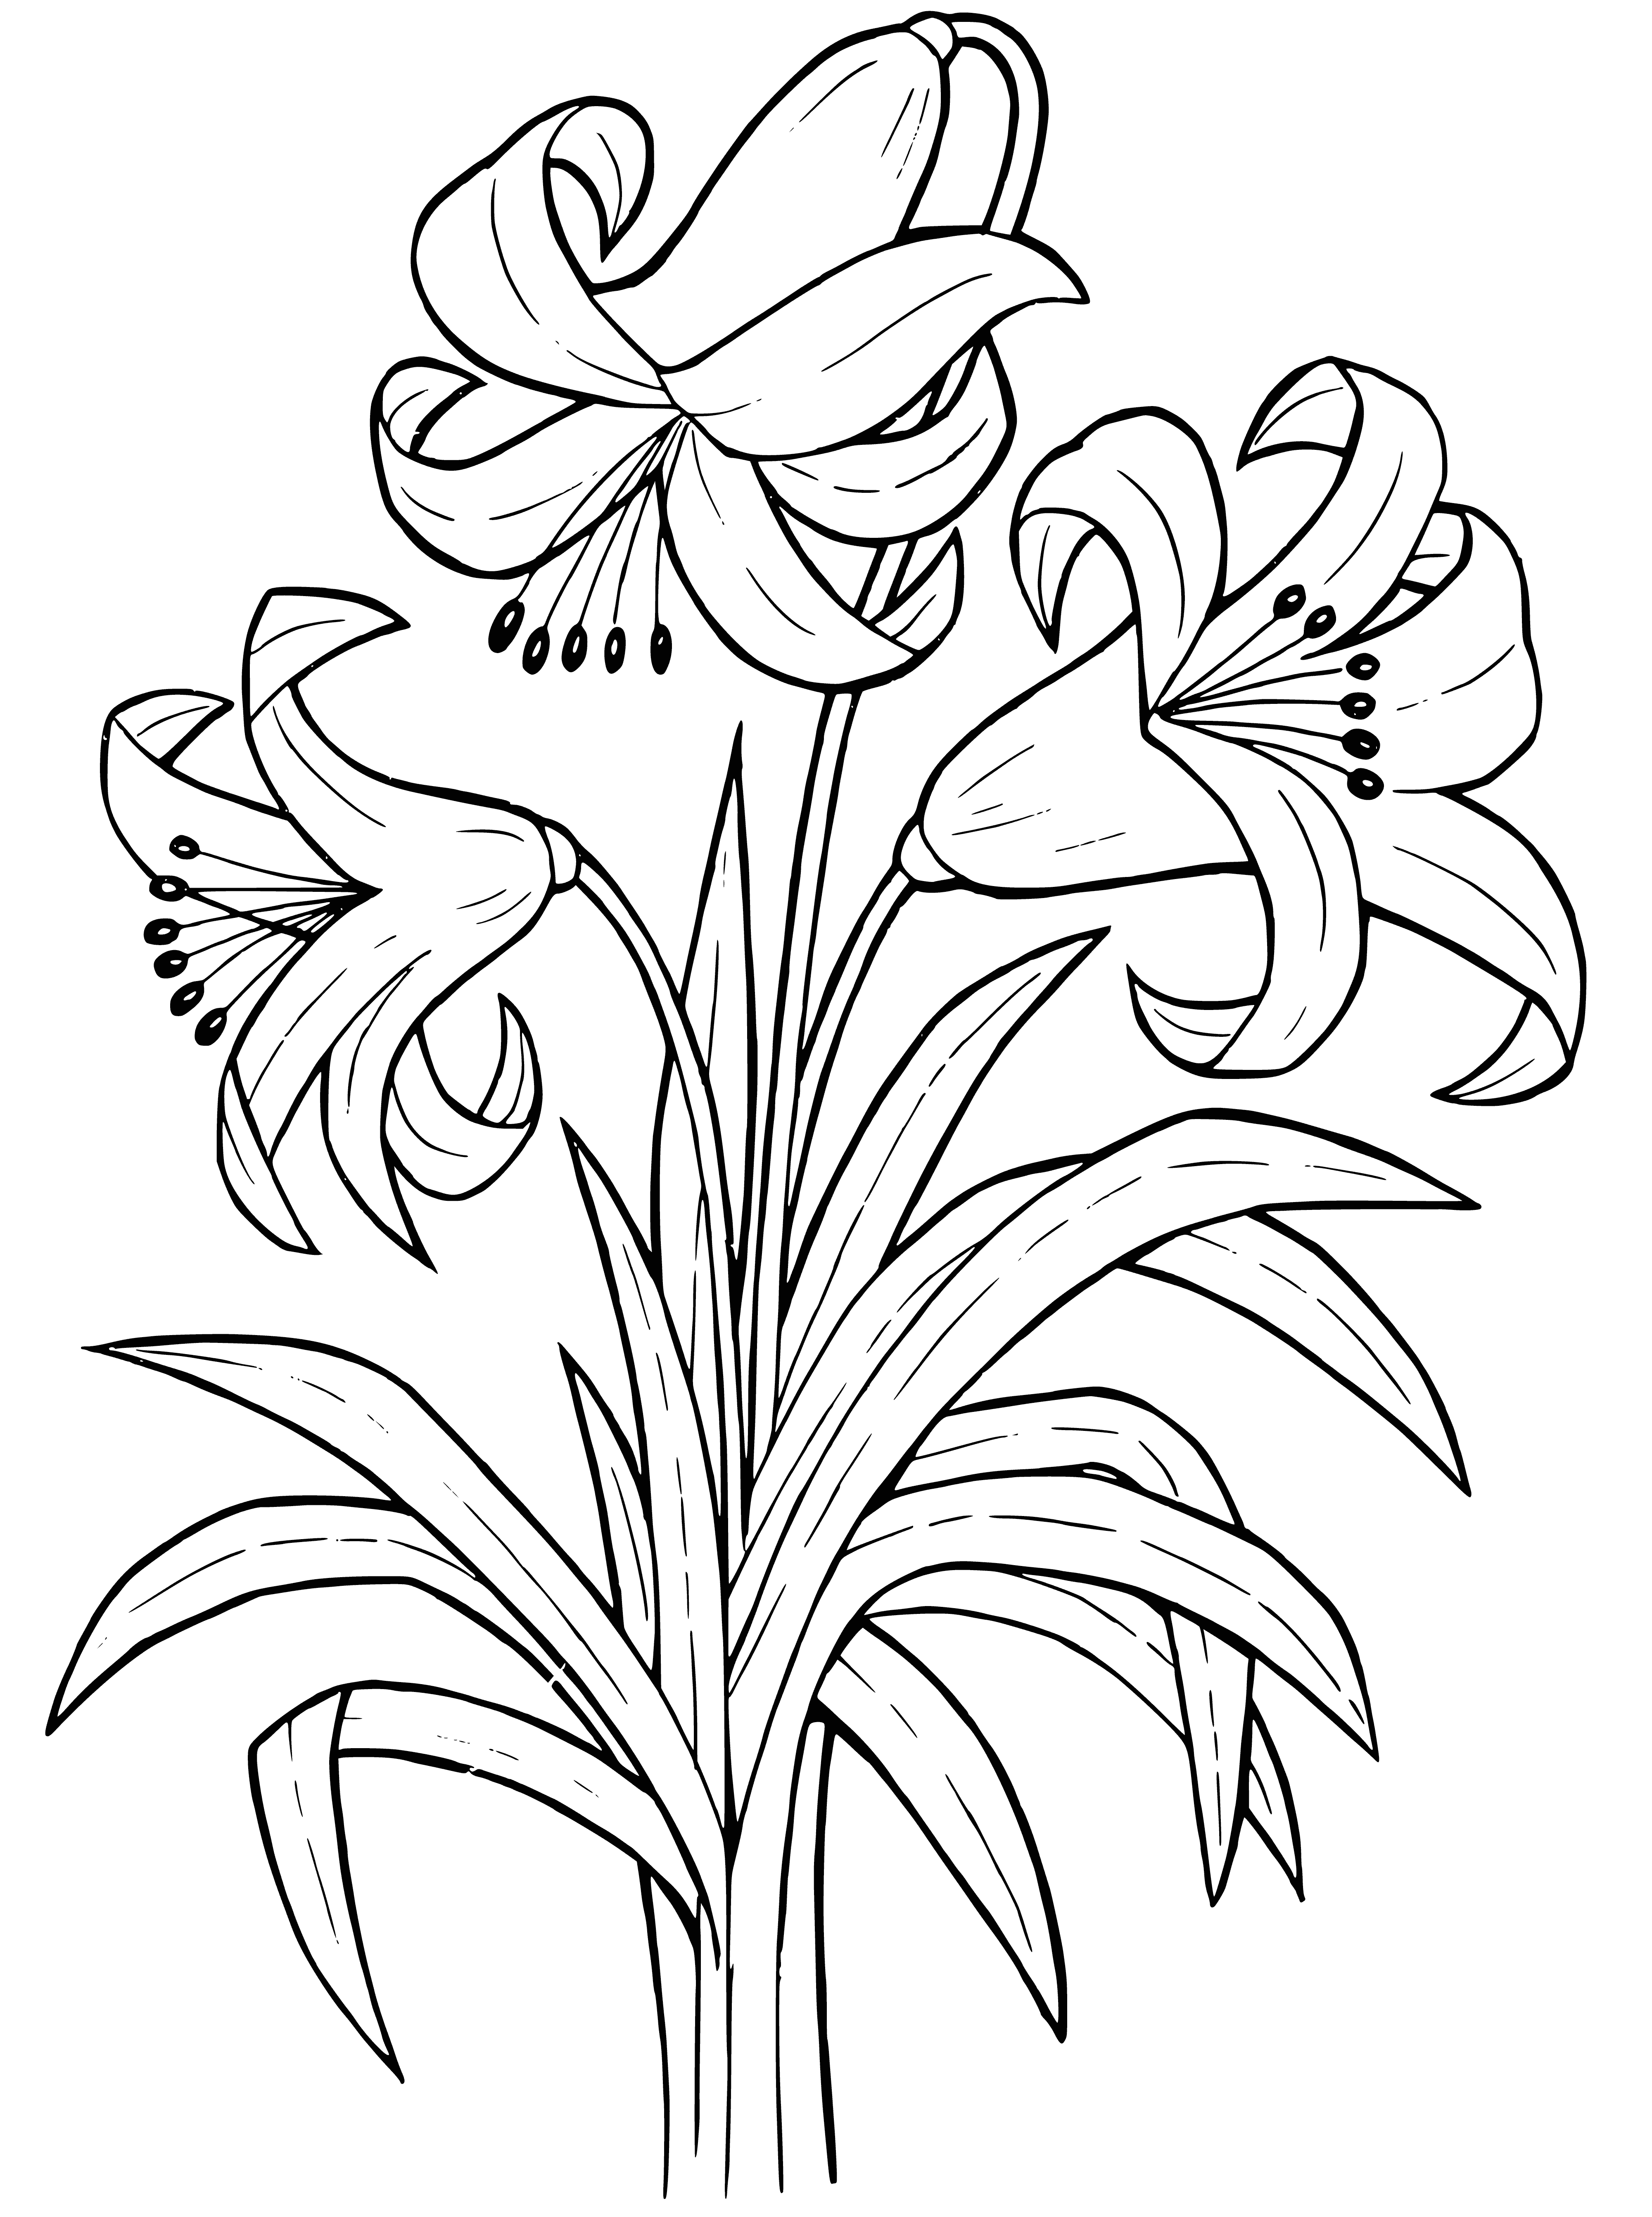 coloring page: A single white lily graces the frame, its petals curled inwards and its stamen poking out. Thin green leaves extend outwards.